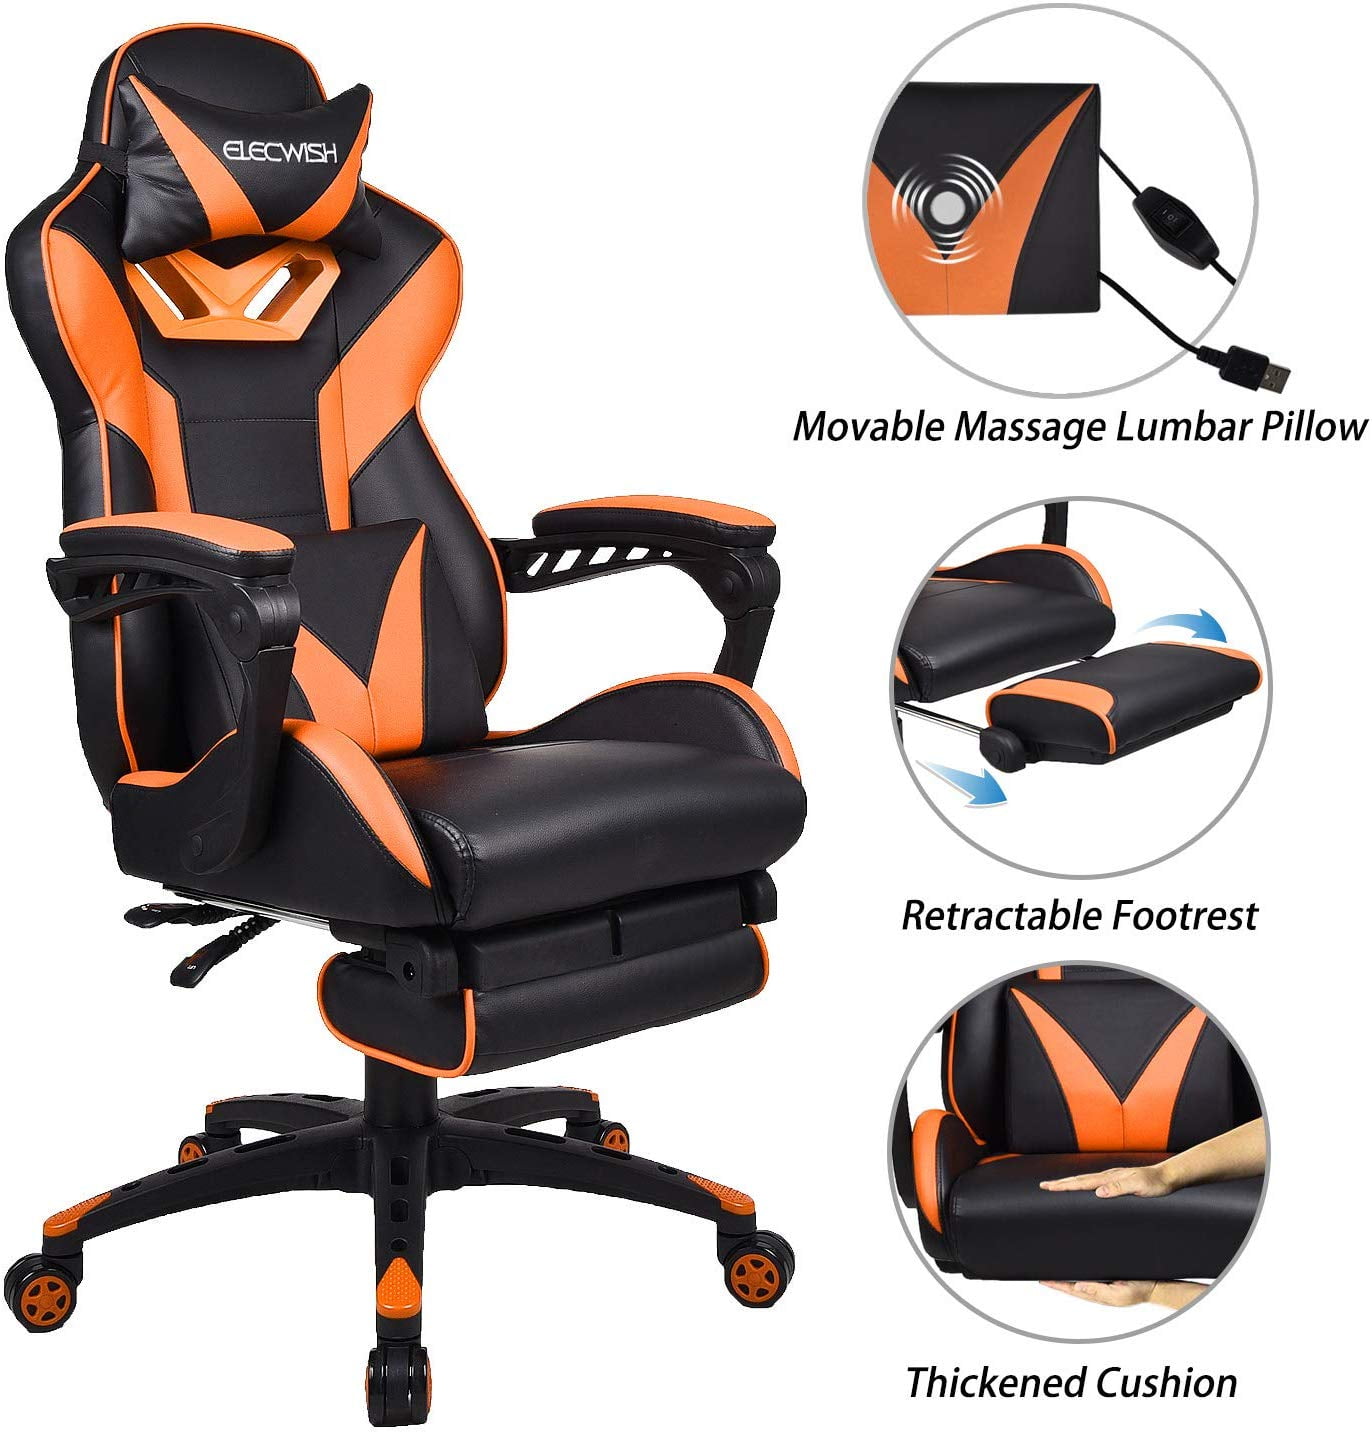 Game Chair Office PU Leather Chair massage chair Adjustable 360° Black & Orange 